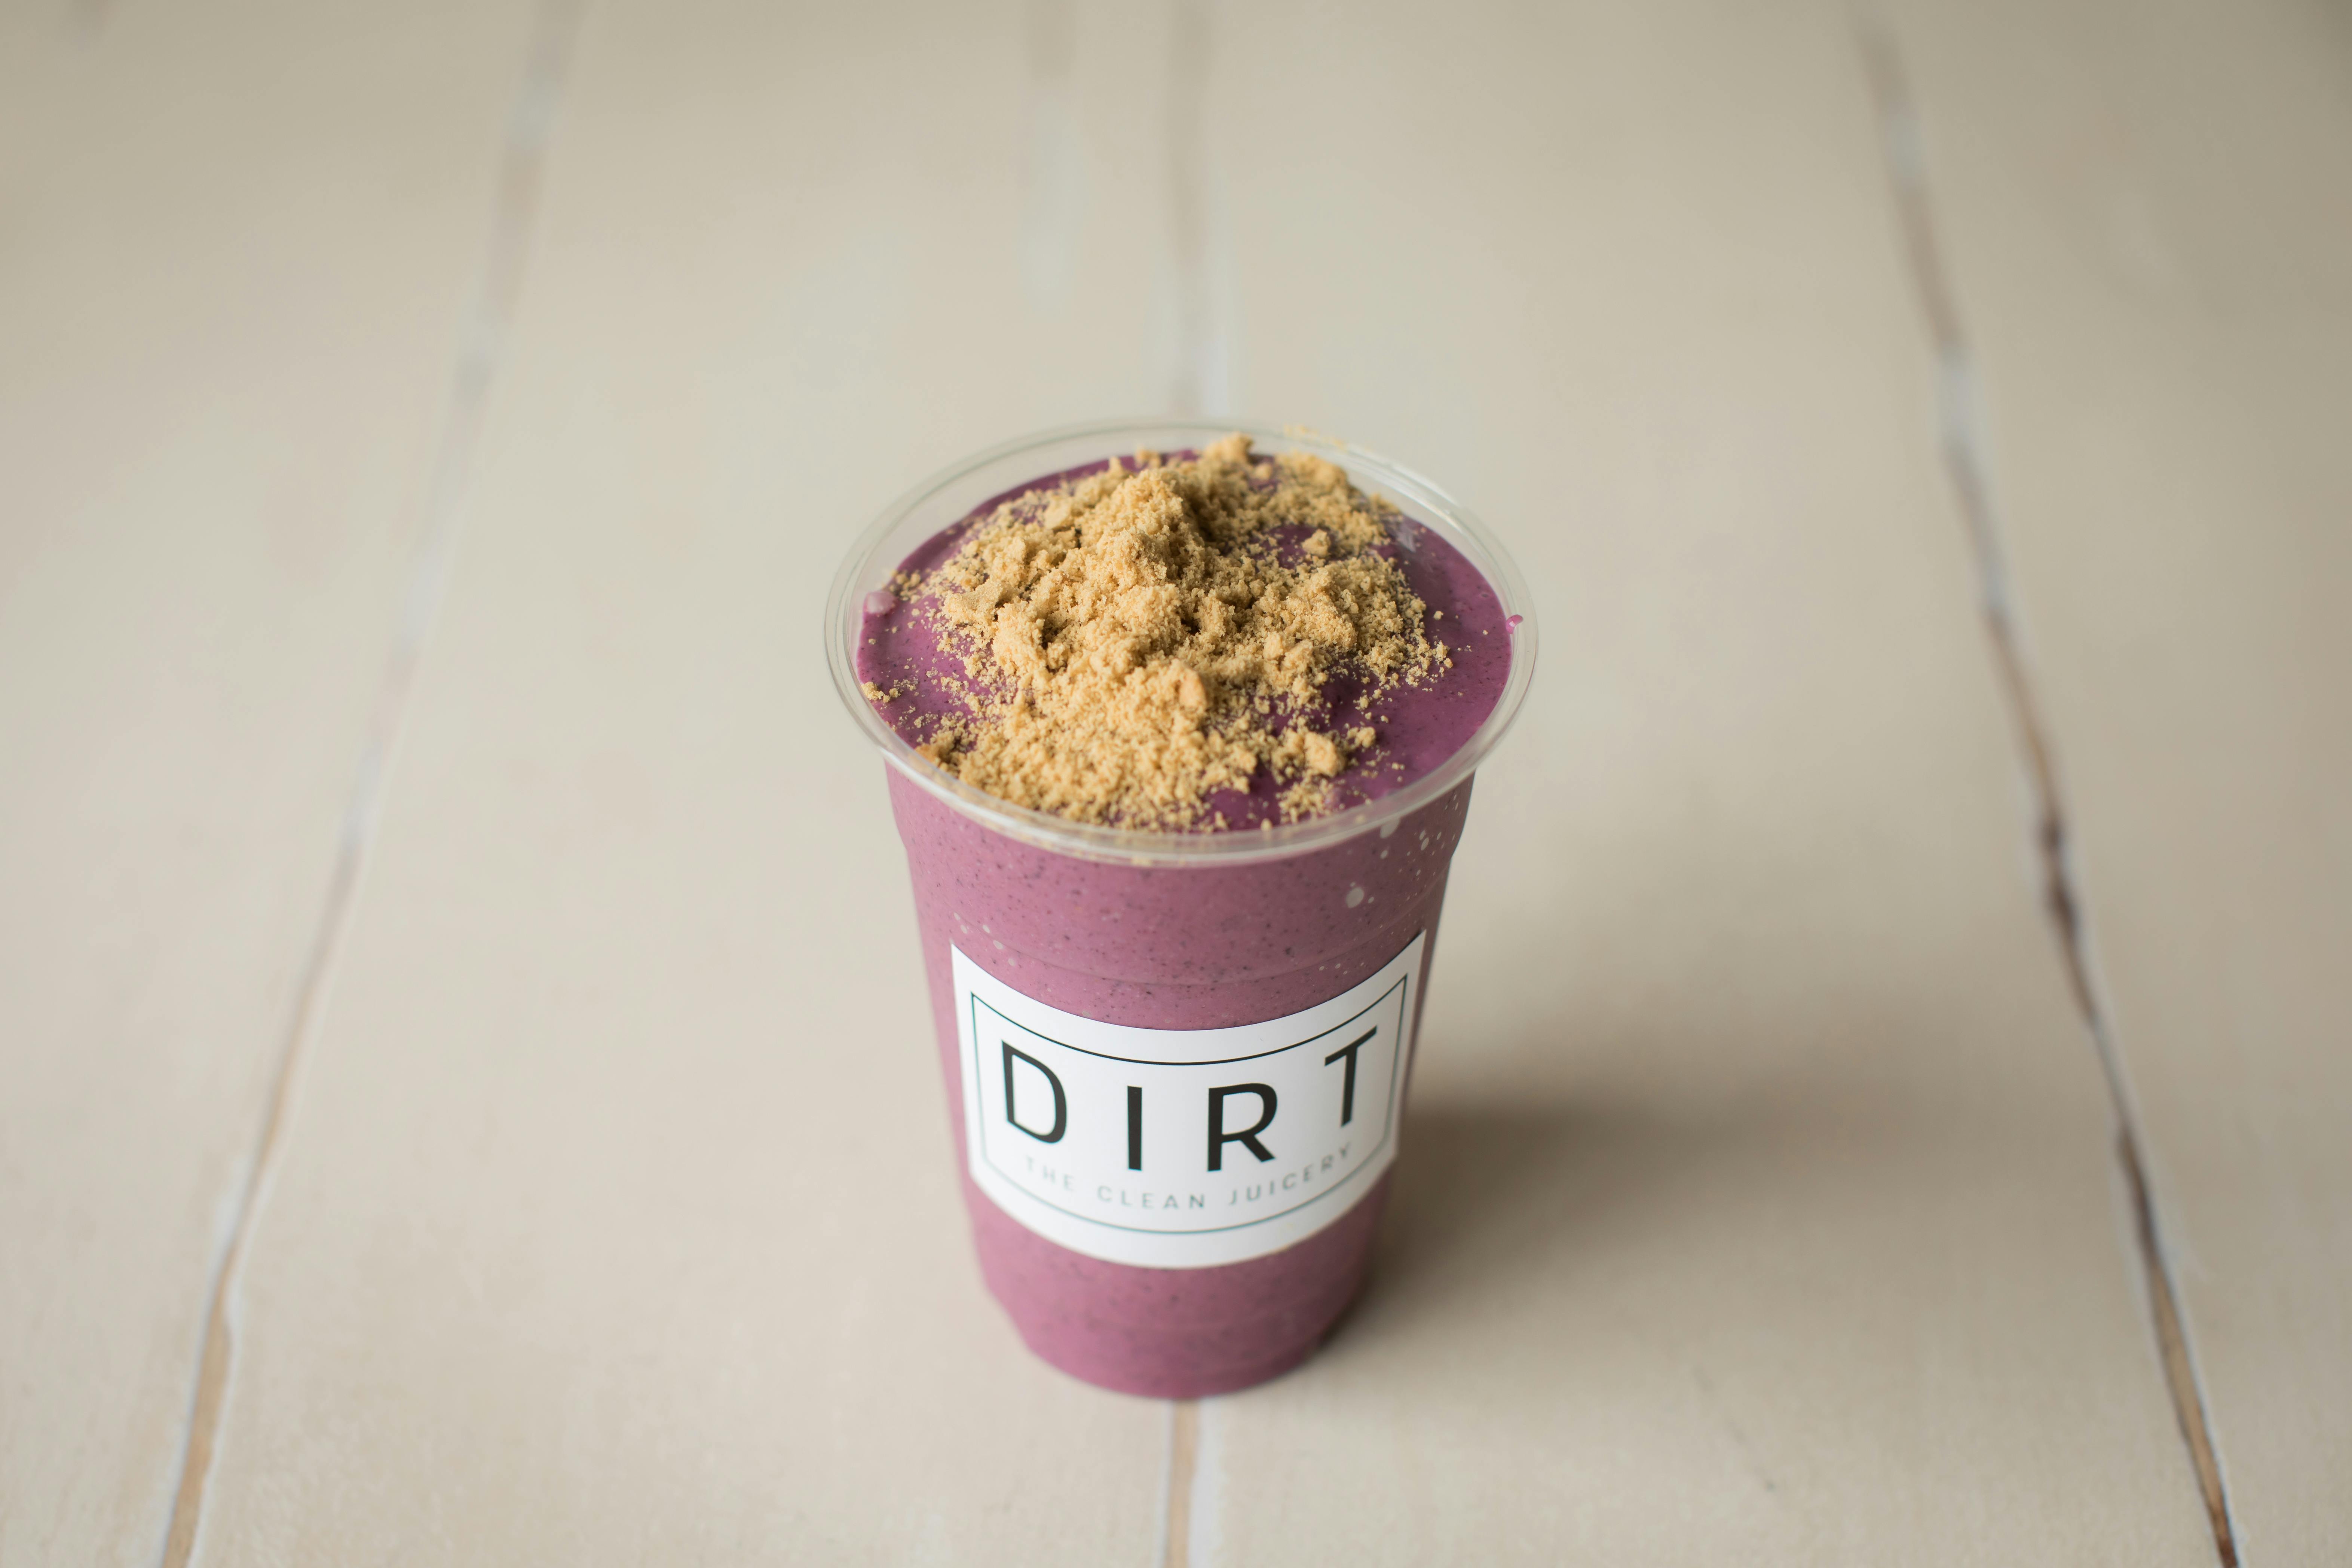 Blueberry Cheesecake Smoothie from Dirt Juicery - Bay Park Square in Green Bay, WI